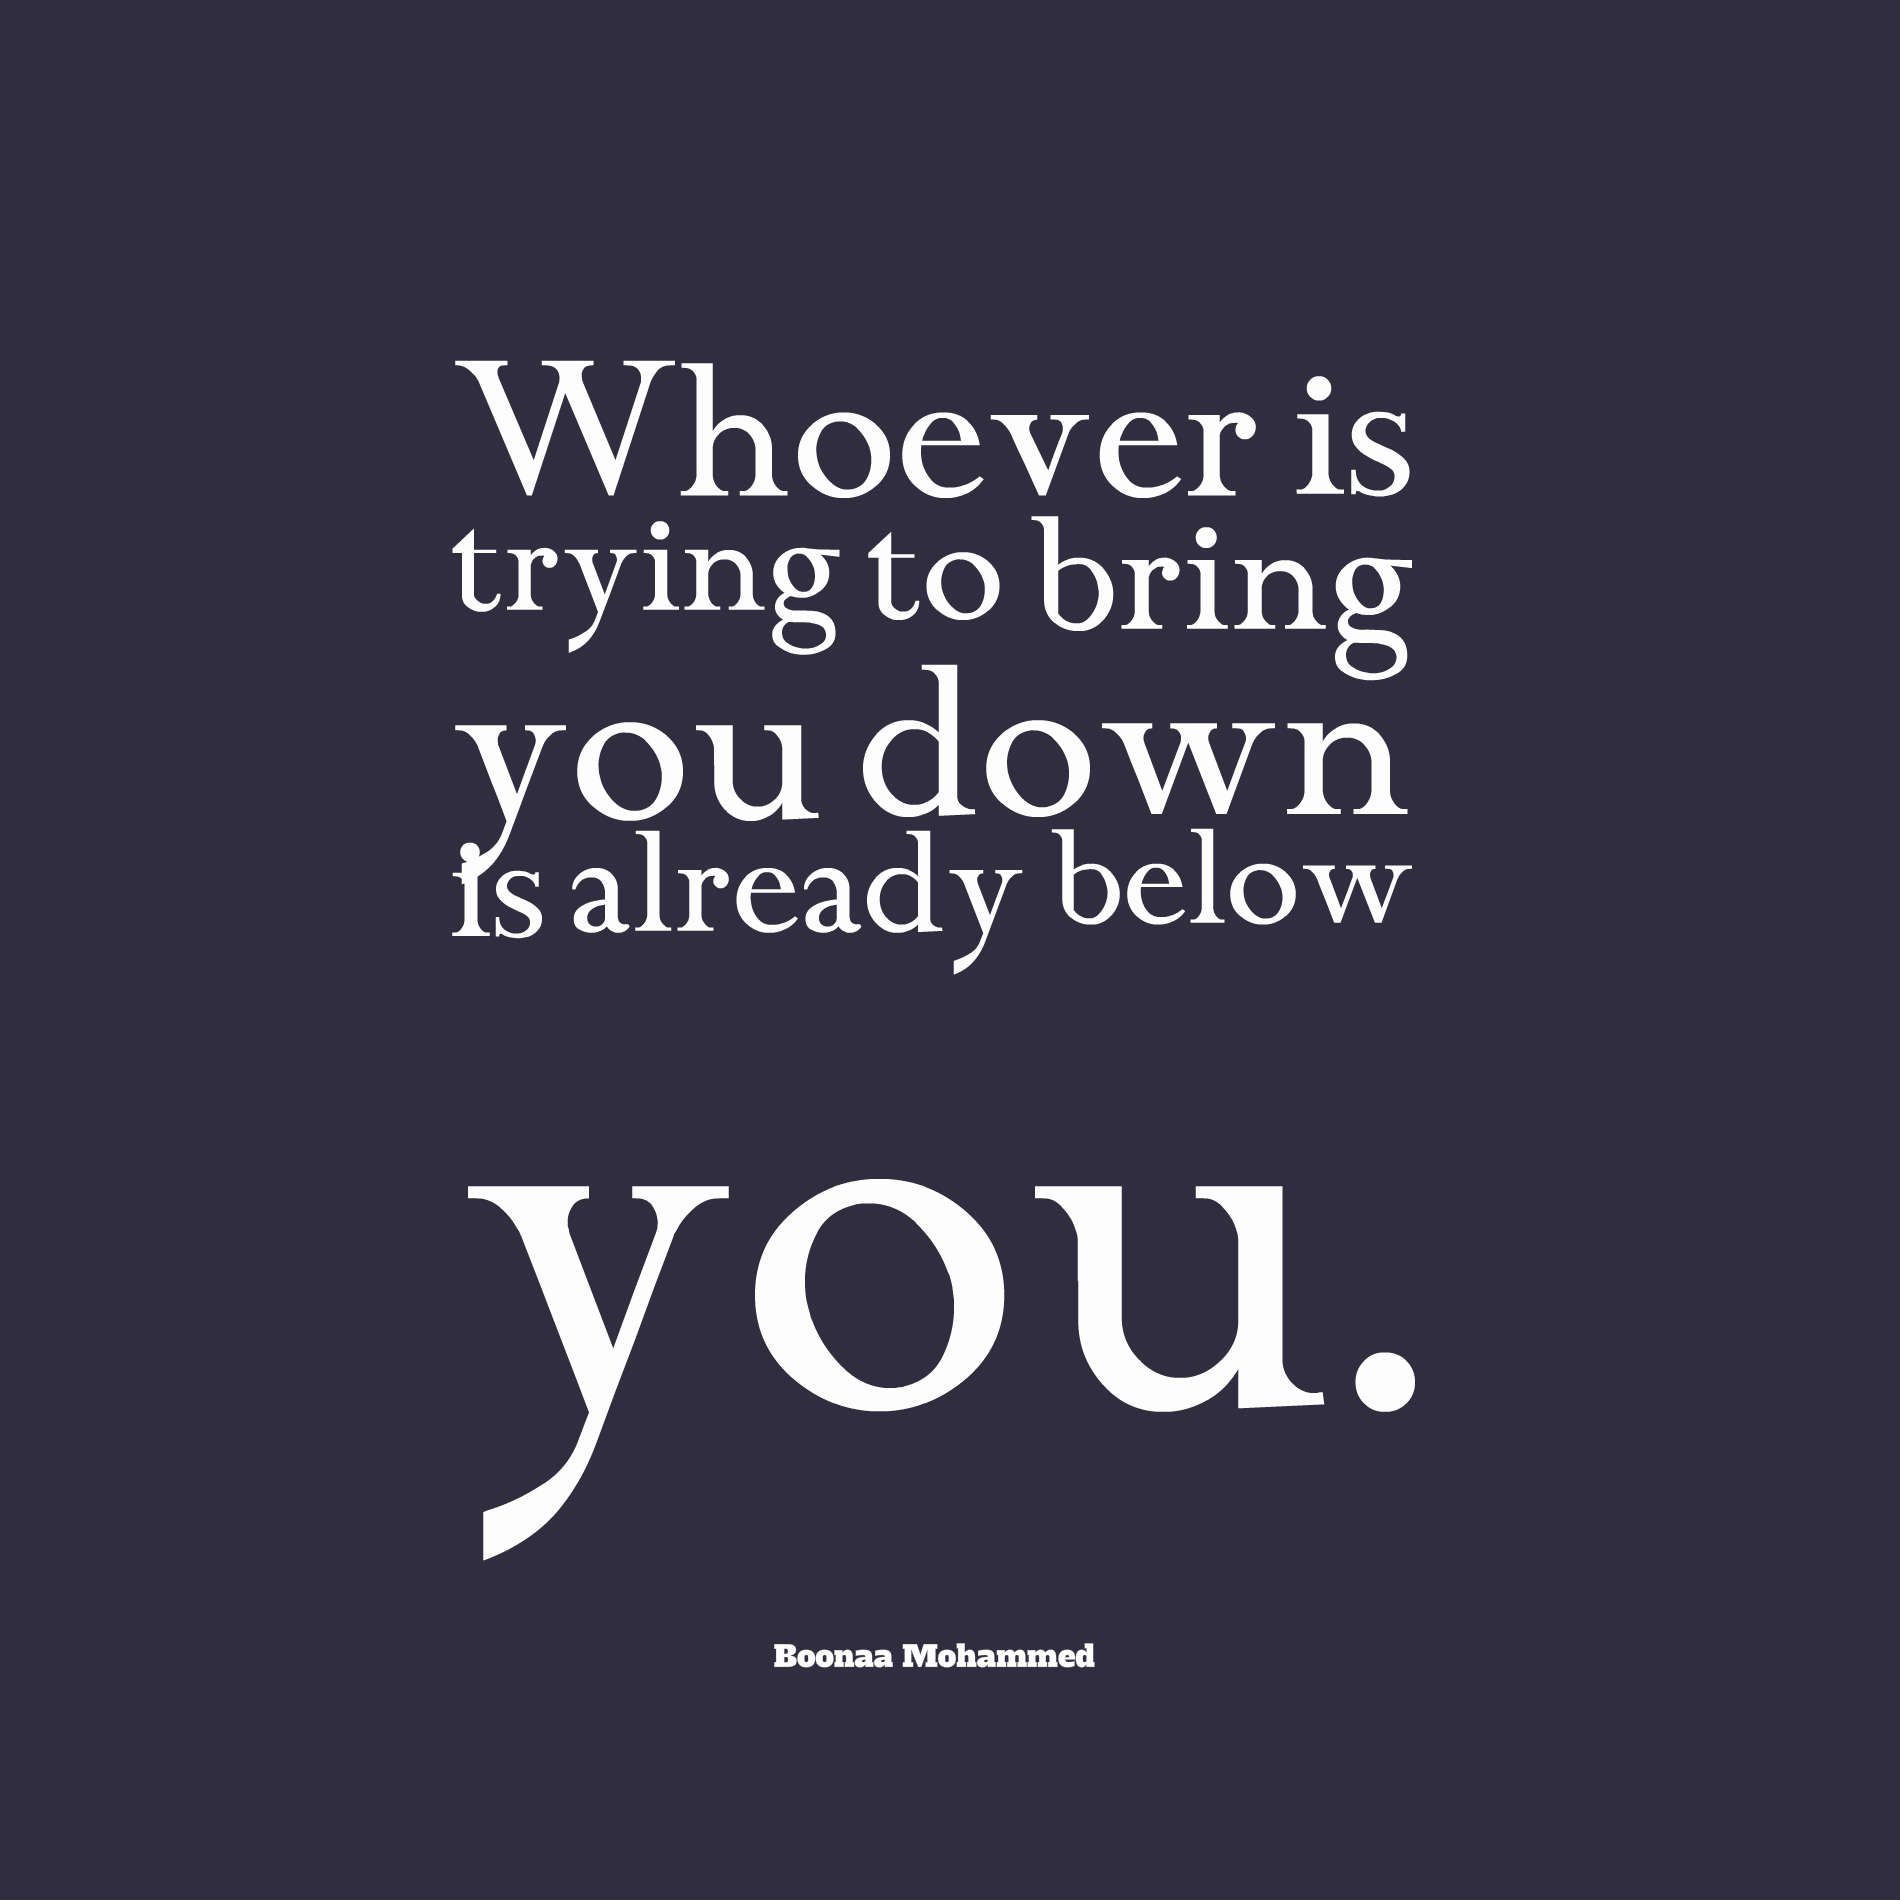 Whoever is trying to bring you down is already below you.